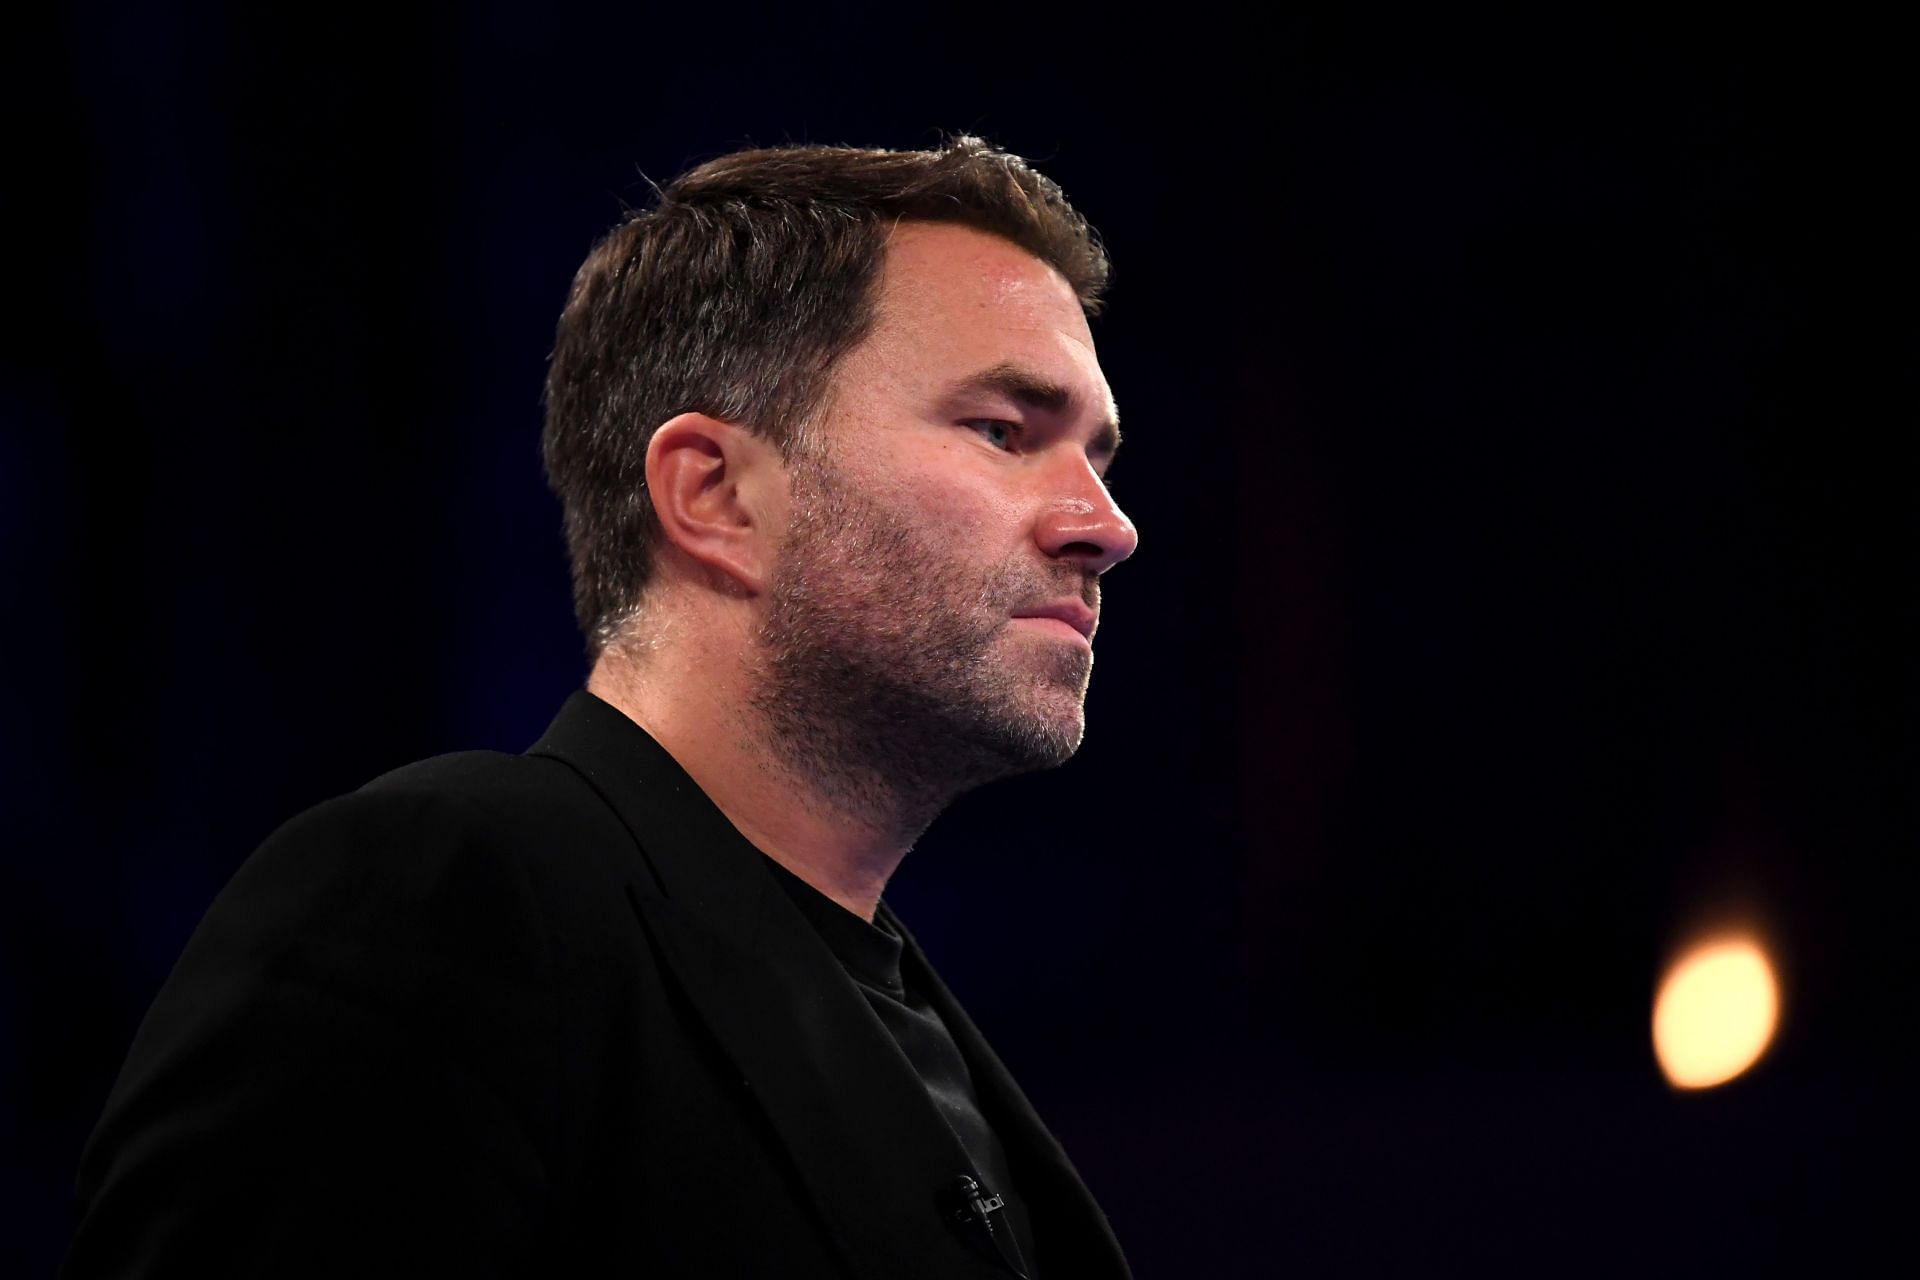 Eddie Hearn at the Boxing Hall event